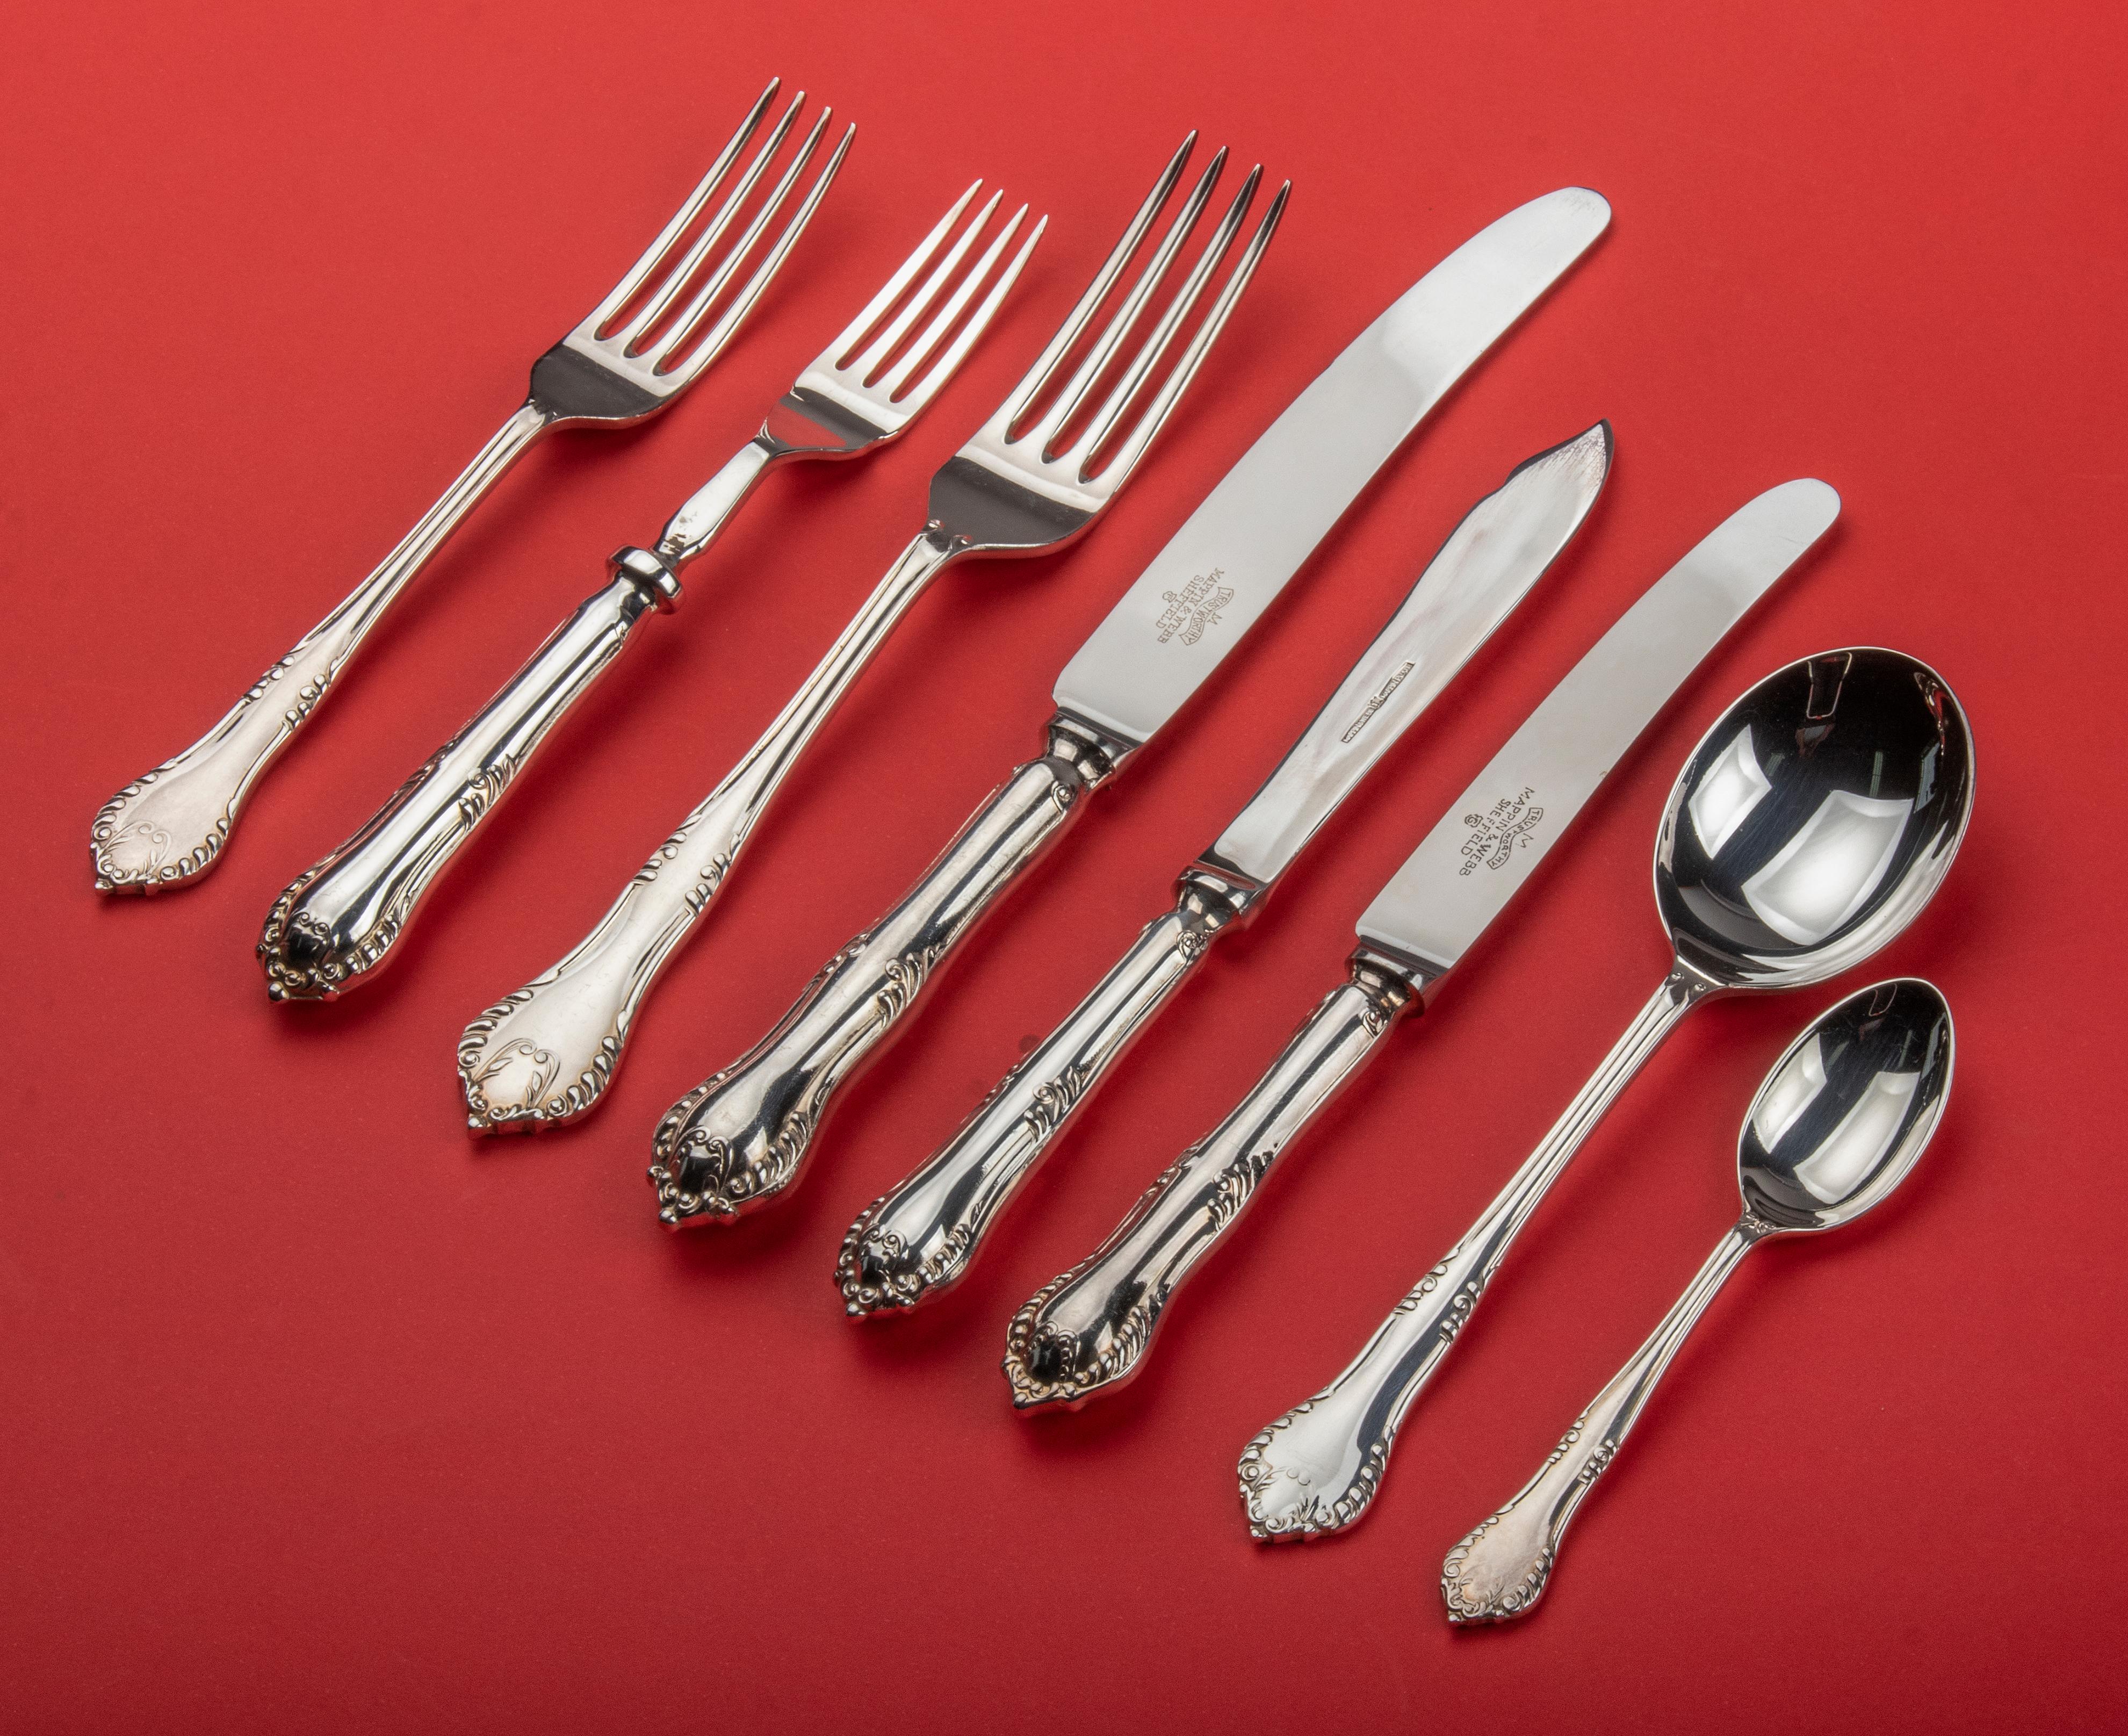 Silver plated tableware for eight persons by the English maker Mappin & Webb. 79 parts in total. The cutlery has an elegant classic design with small decorative edges on the handles. The cutlery is in the original wooden box (original key is